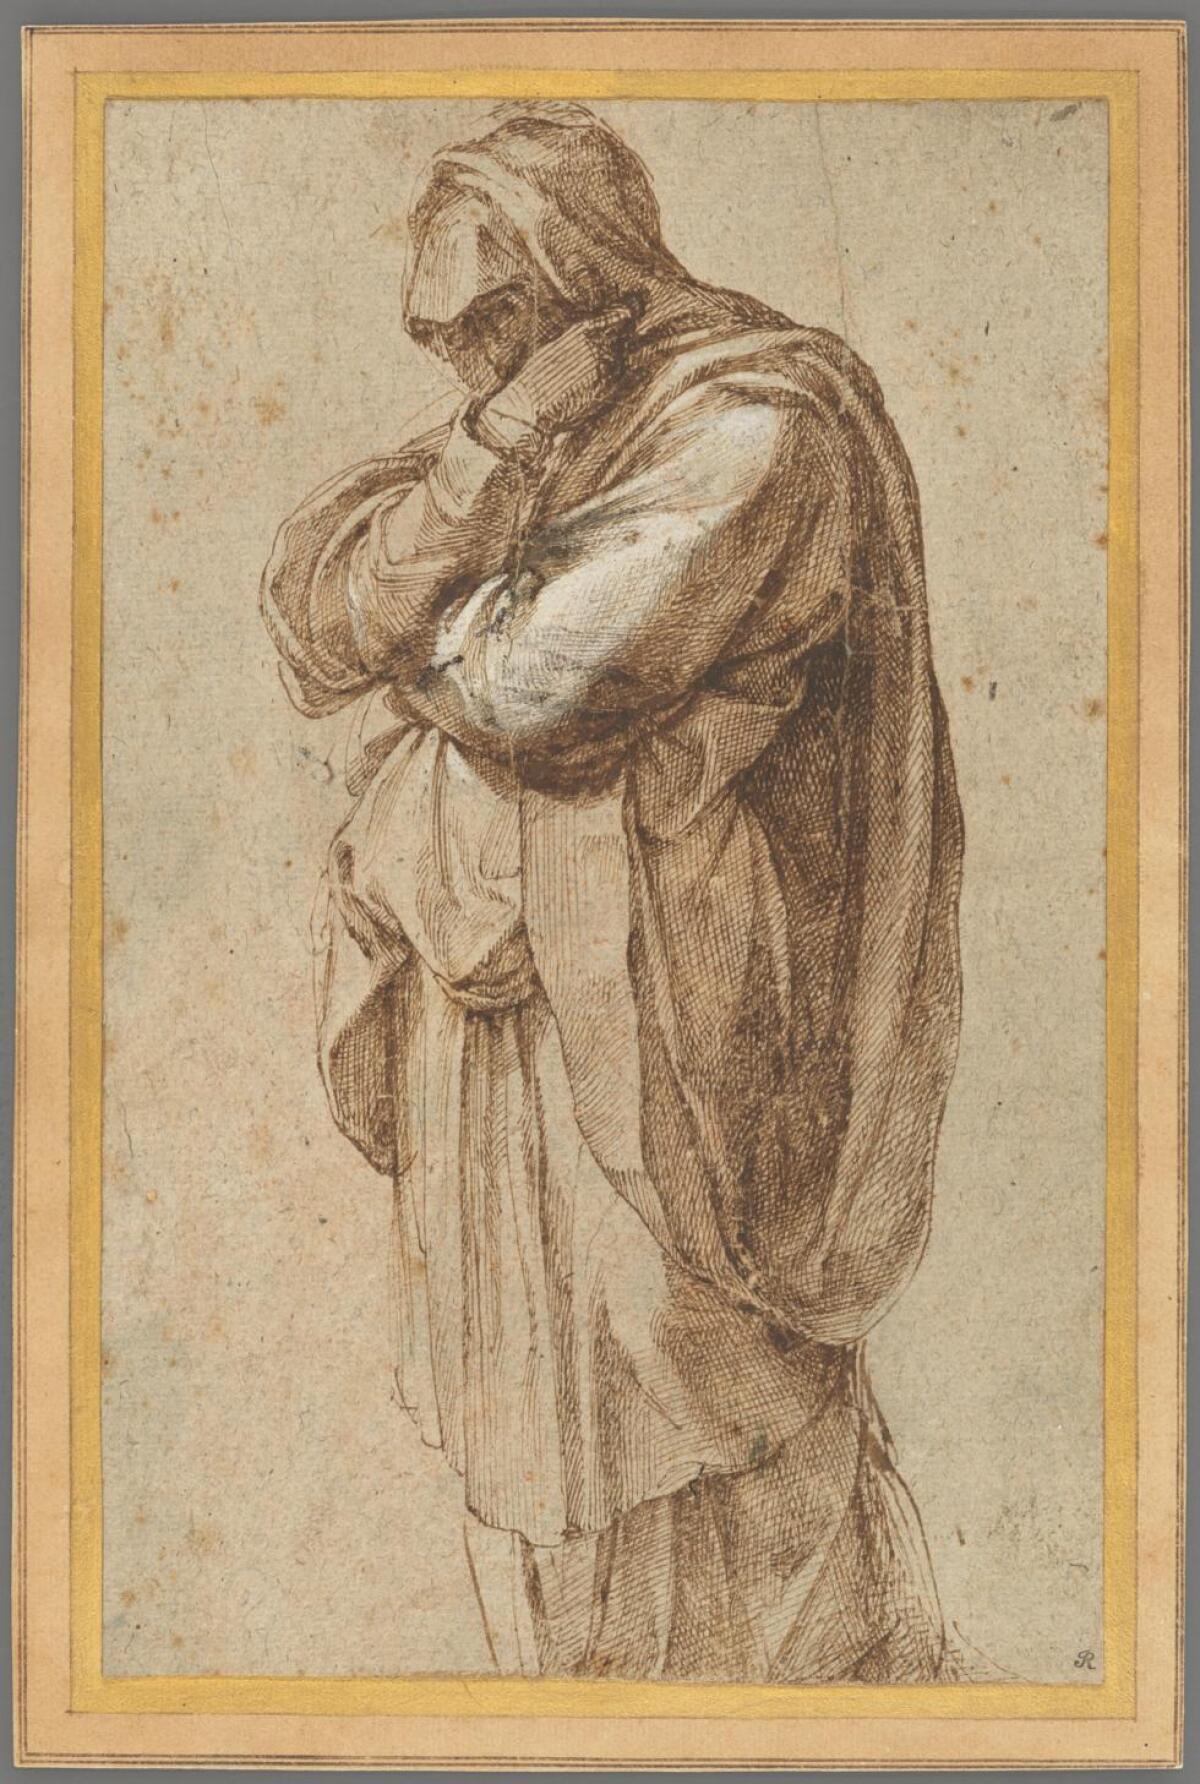 Michelangelo, "Study of a Mourning Woman," 1500-1505, pen and brown ink, white opaque watercolor.